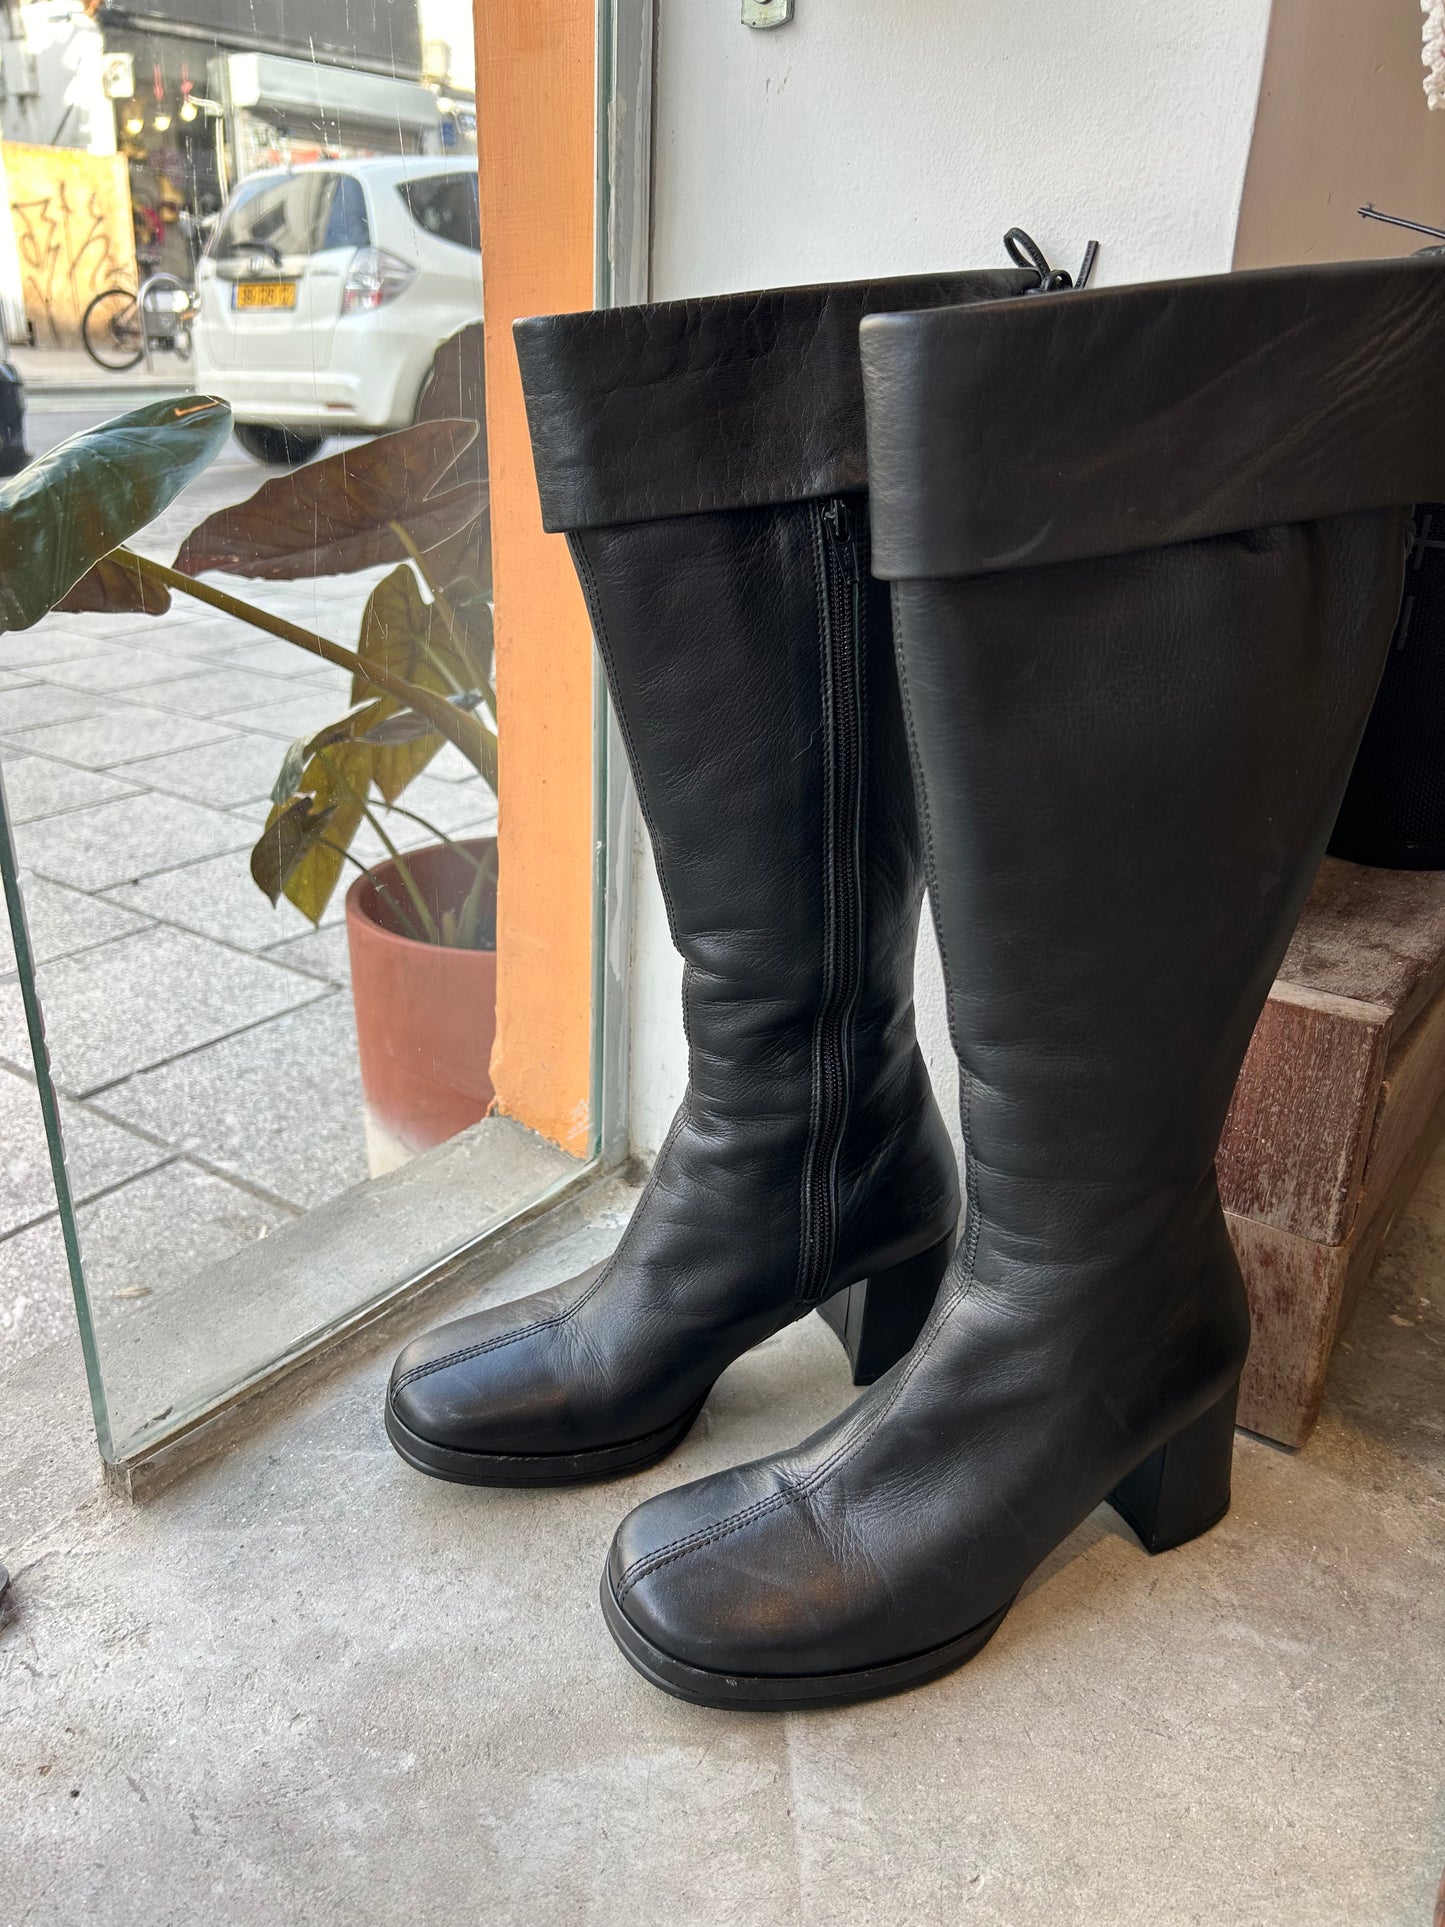 BALLY leather knee high boots